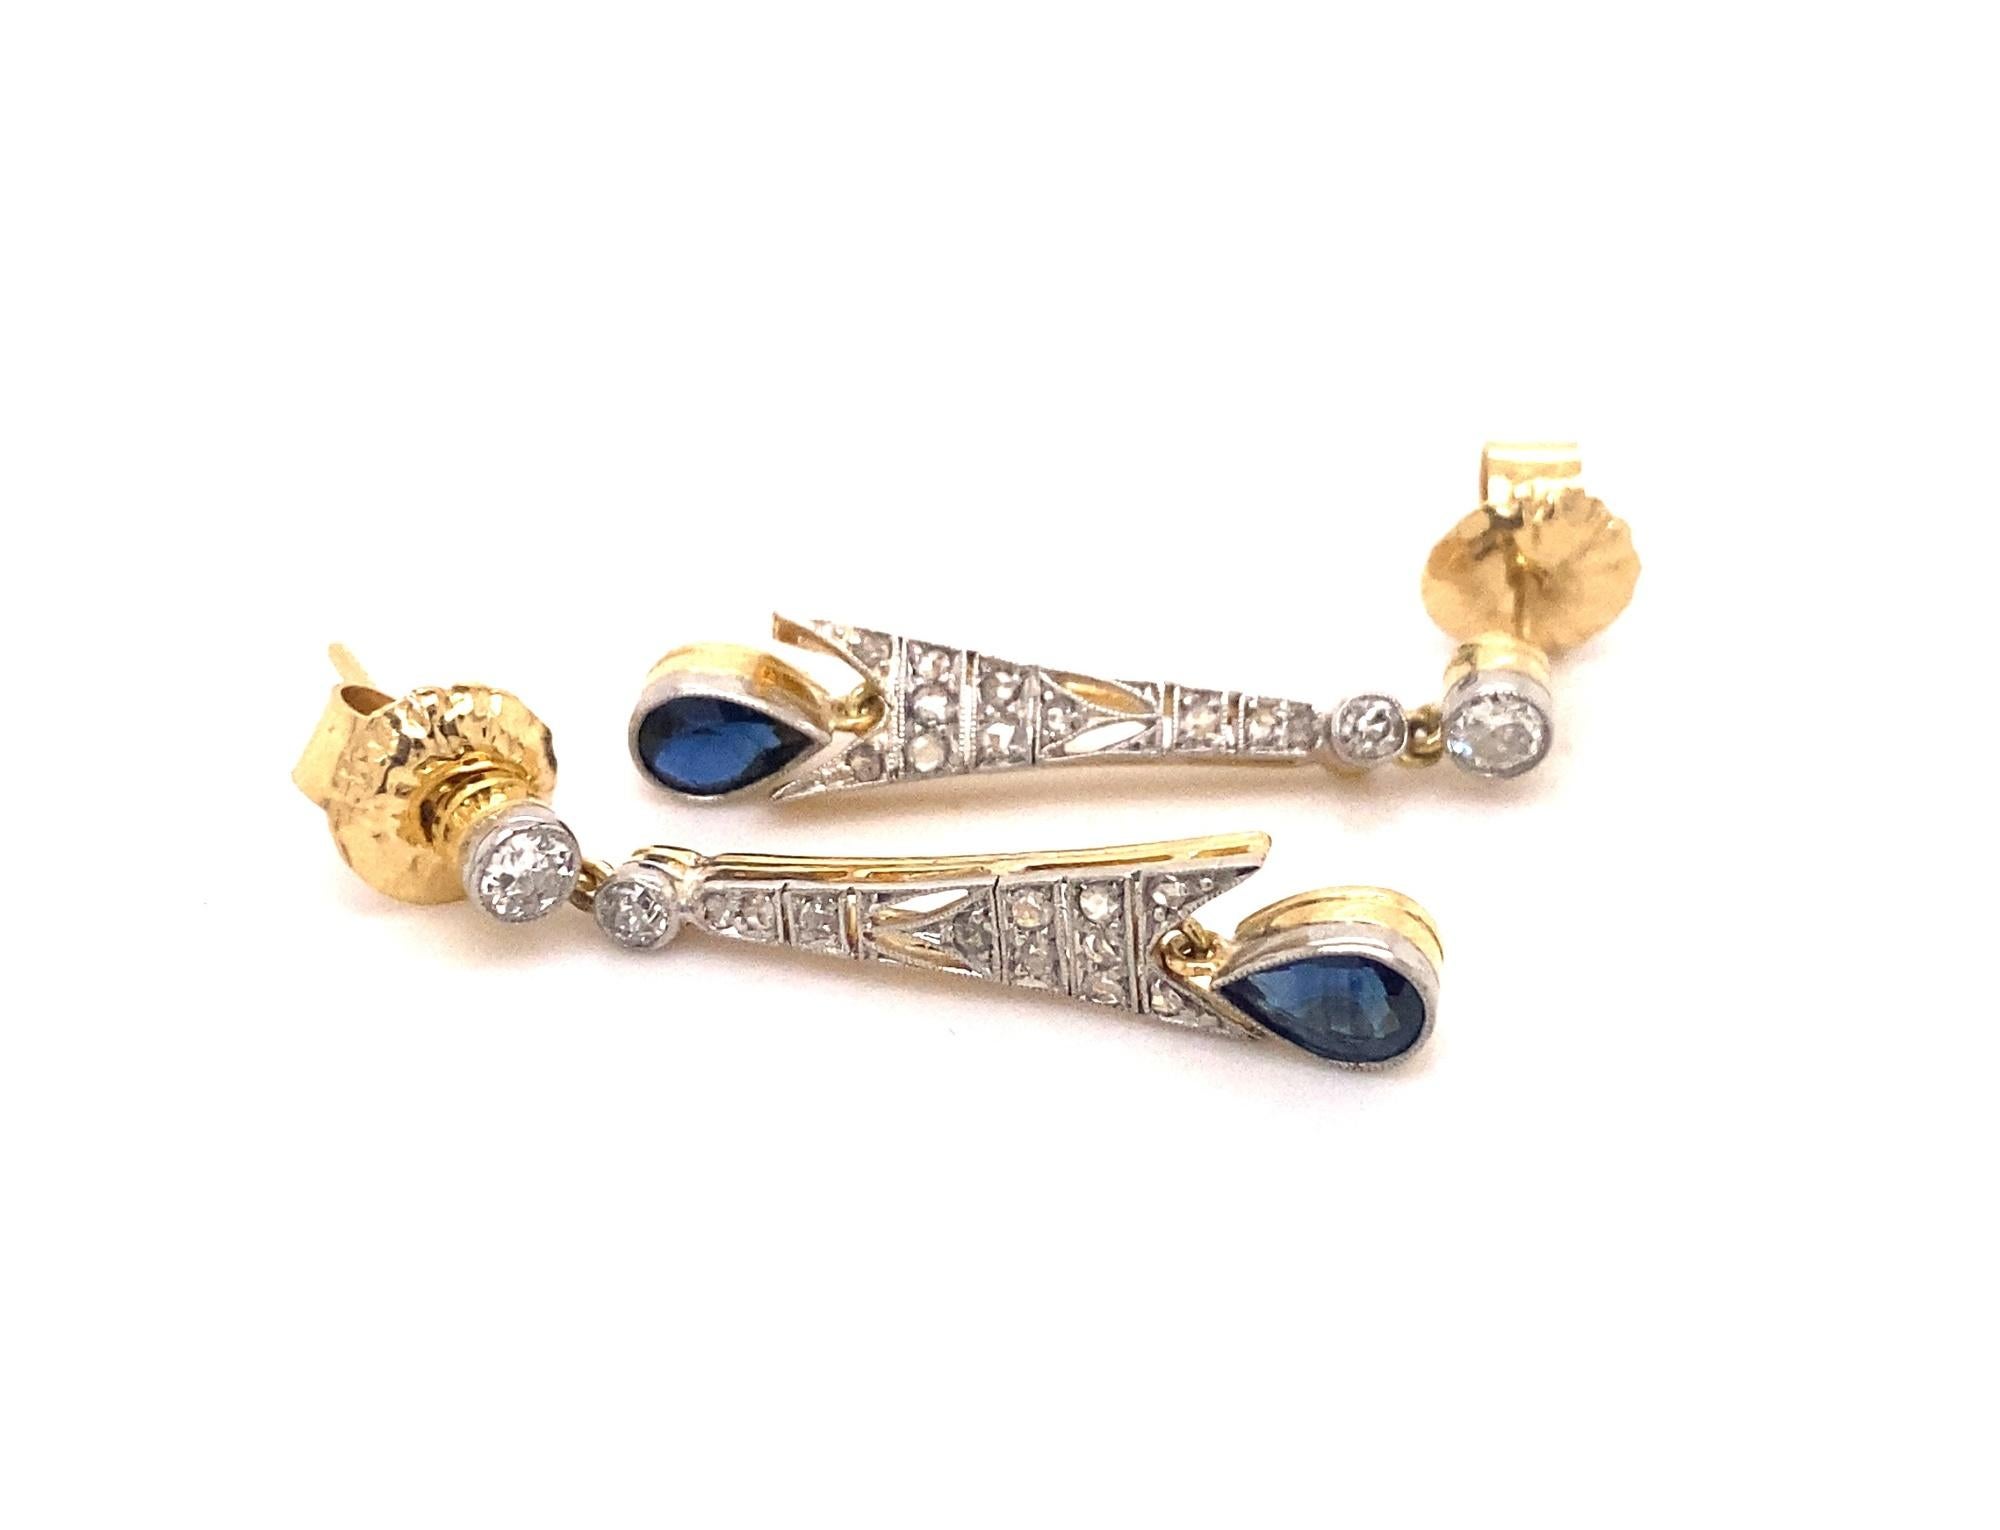 This is a beautiful pair of art deco earrings set with pear shape natural sapphires and diamonds in platinum with 18K gold backs. There are 18 rose cuts and 4 old mine cut diamonds I color VS-2 clarity total weight .70 carats. The pear-shaped